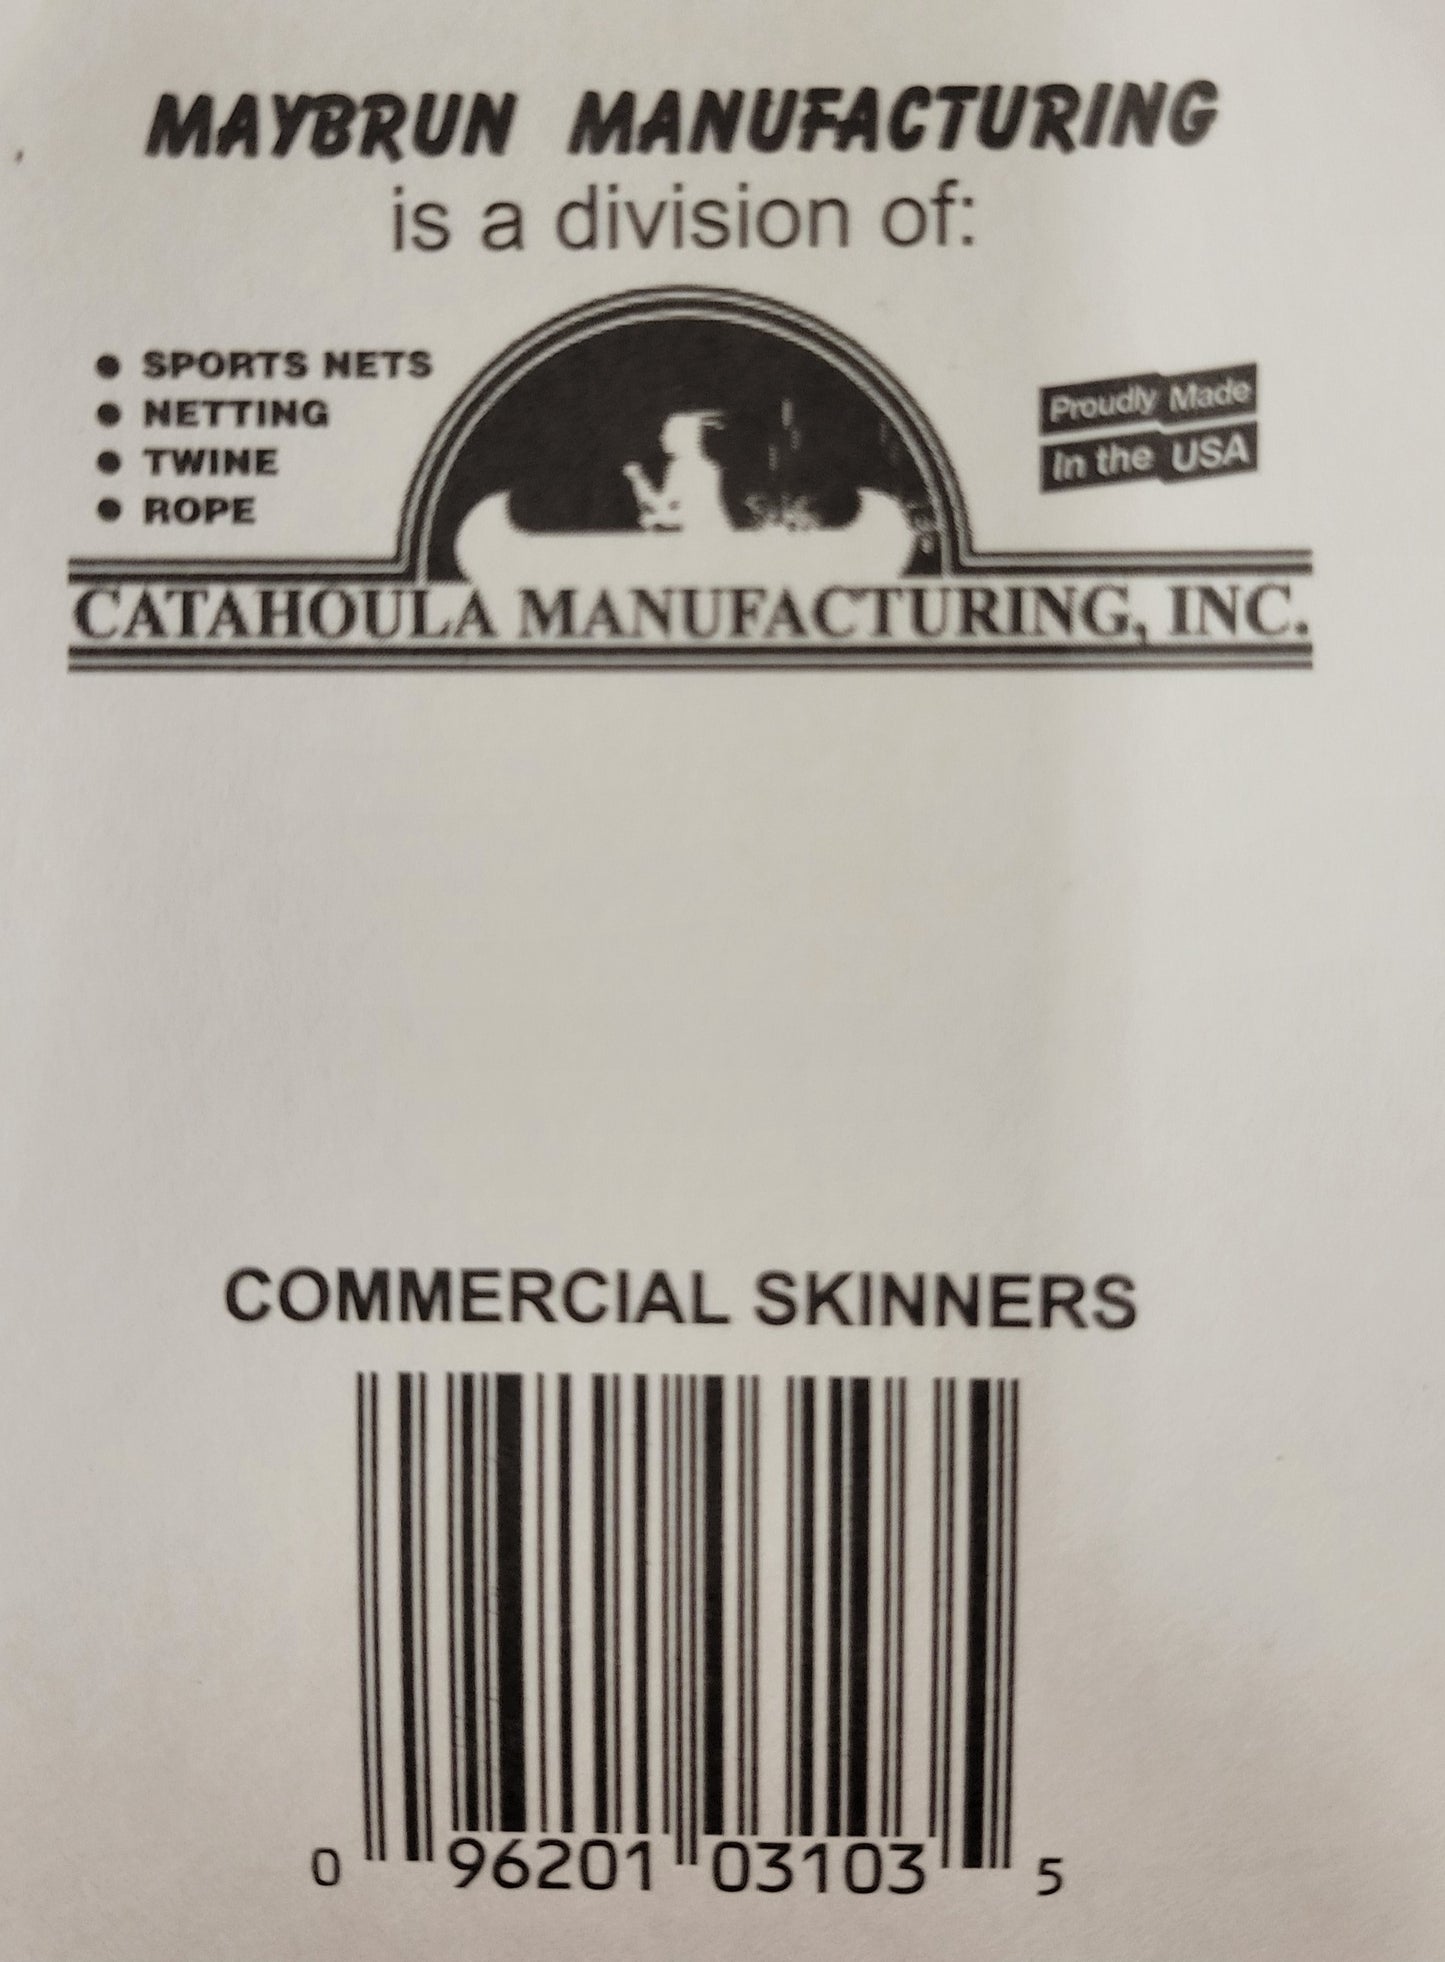 MAYBRUN'S COMMERCIAL SKINNERS 03103